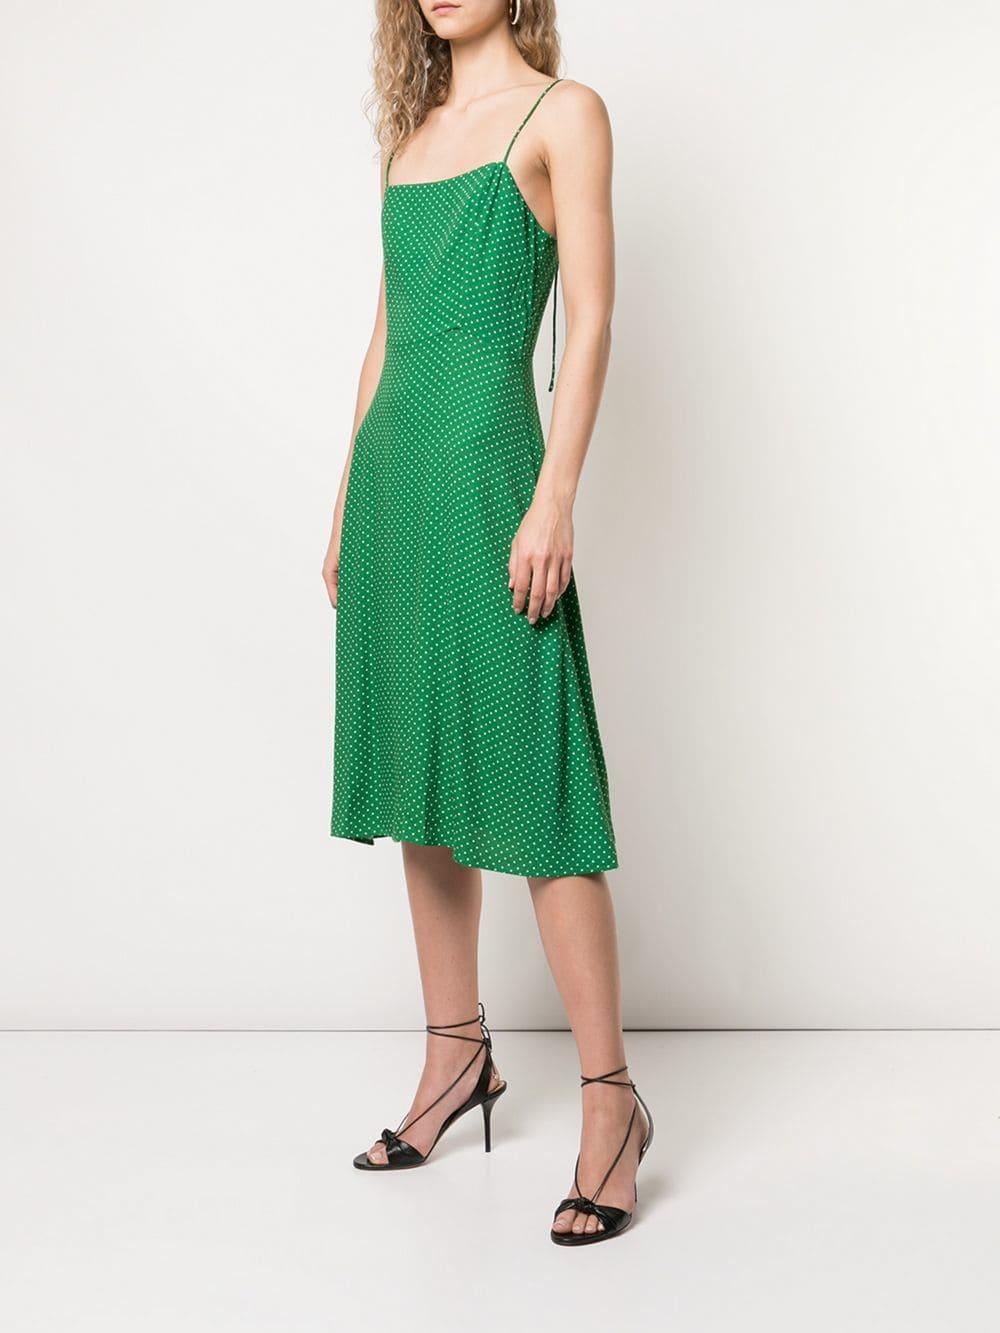 Reformation Synthetic Peach Slip Dress in Green - Lyst